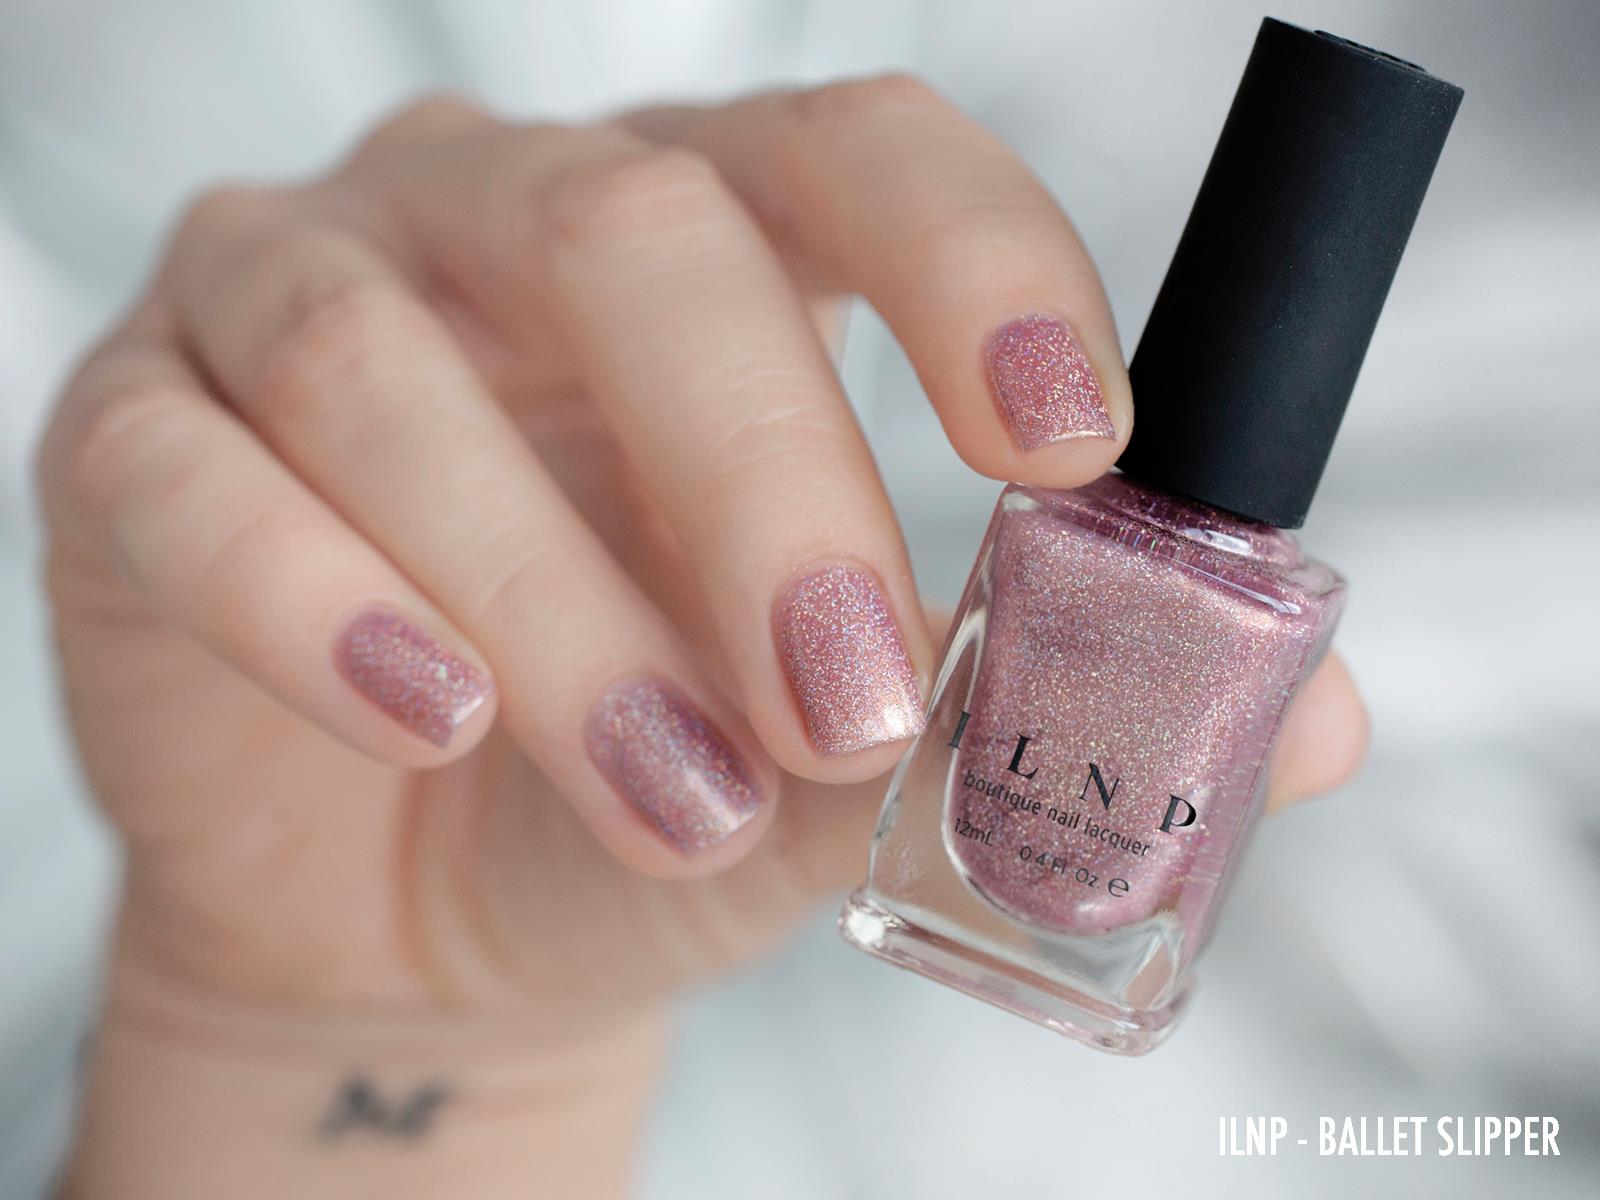 2. "Essie Nail Polish in Ballet Slippers" - wide 7